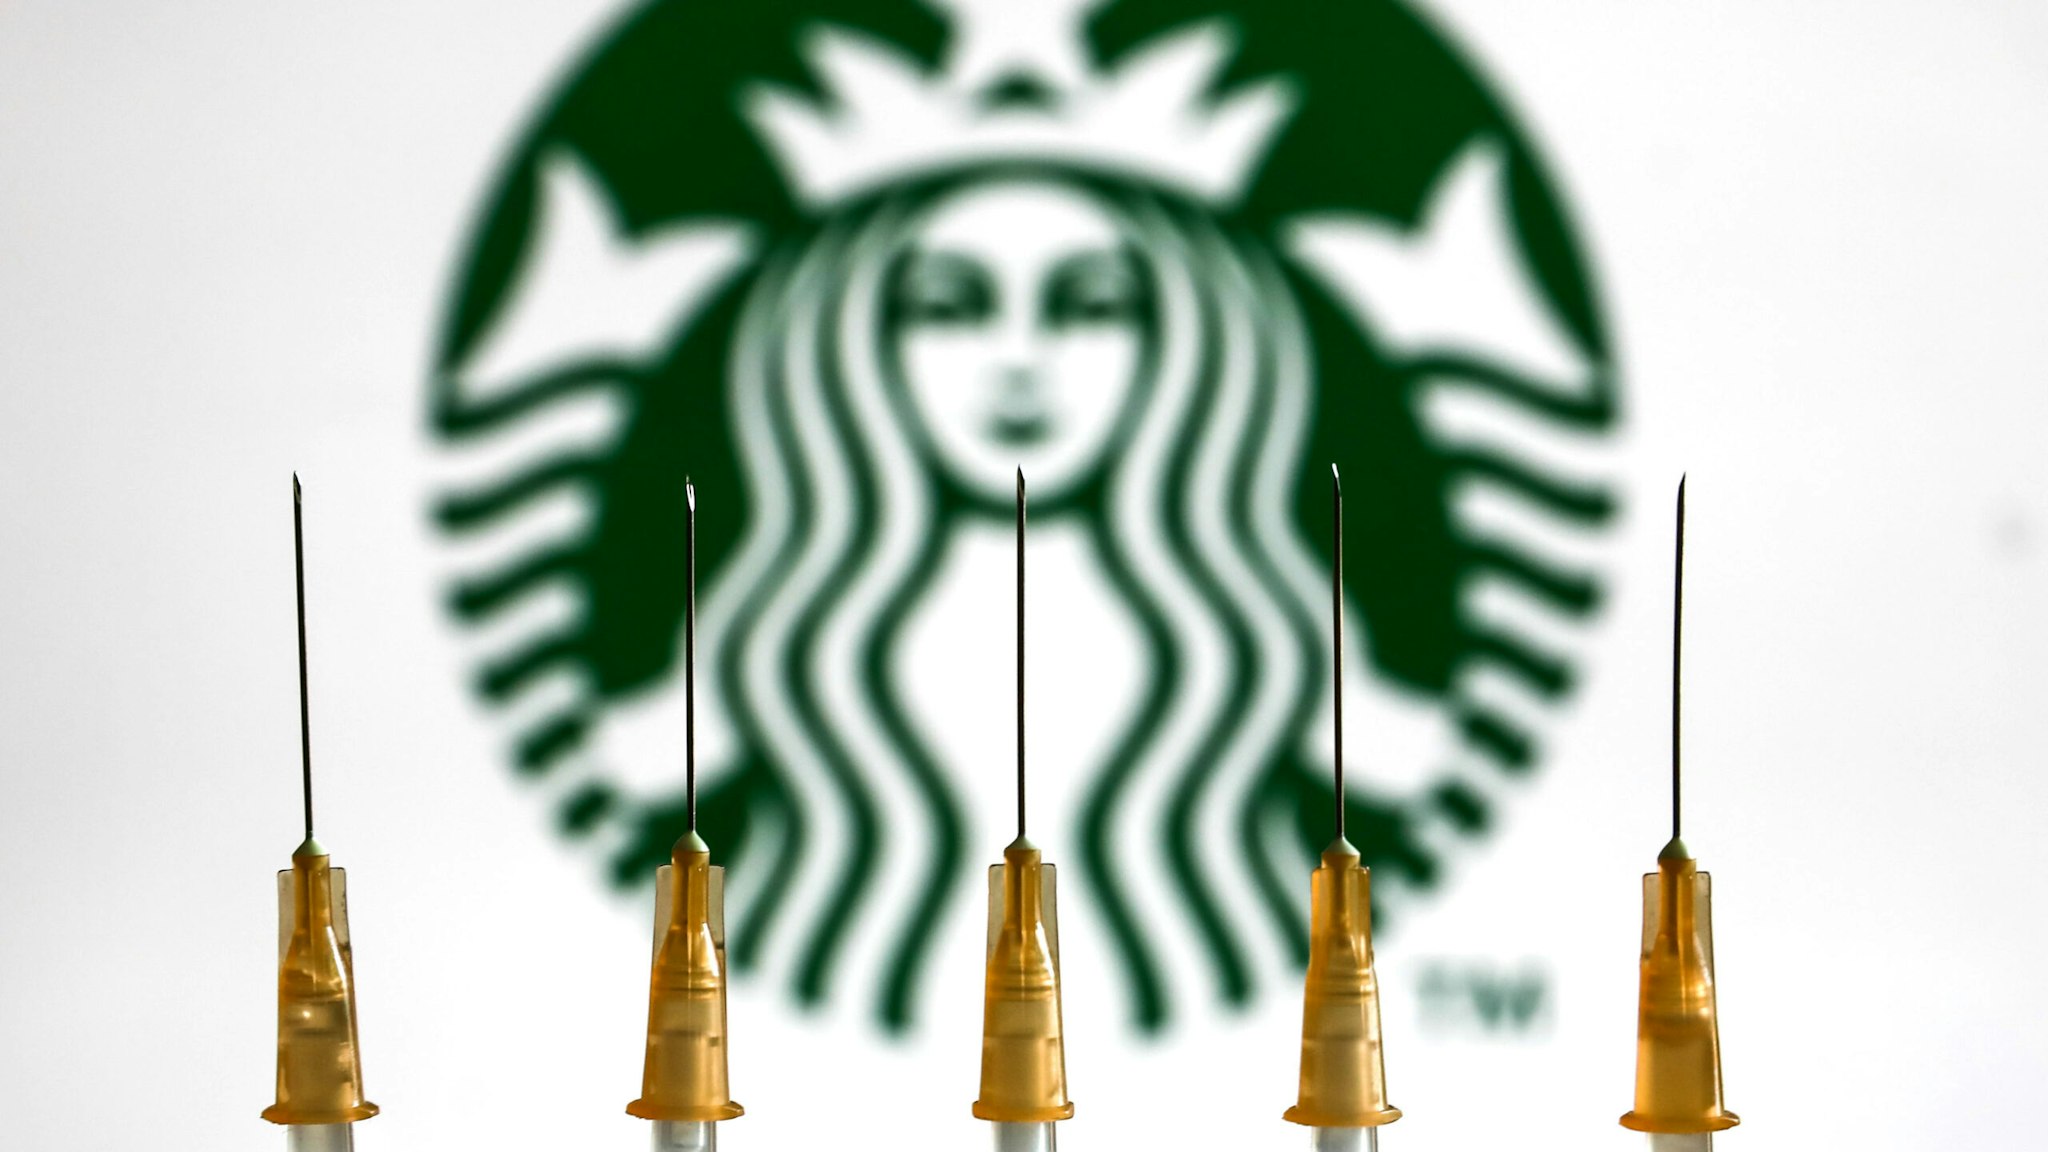 Medical syringes and Starbucks logo displayed in the background are seen in this illustration photo taken in Krakow, Poland on January 11, 2022.